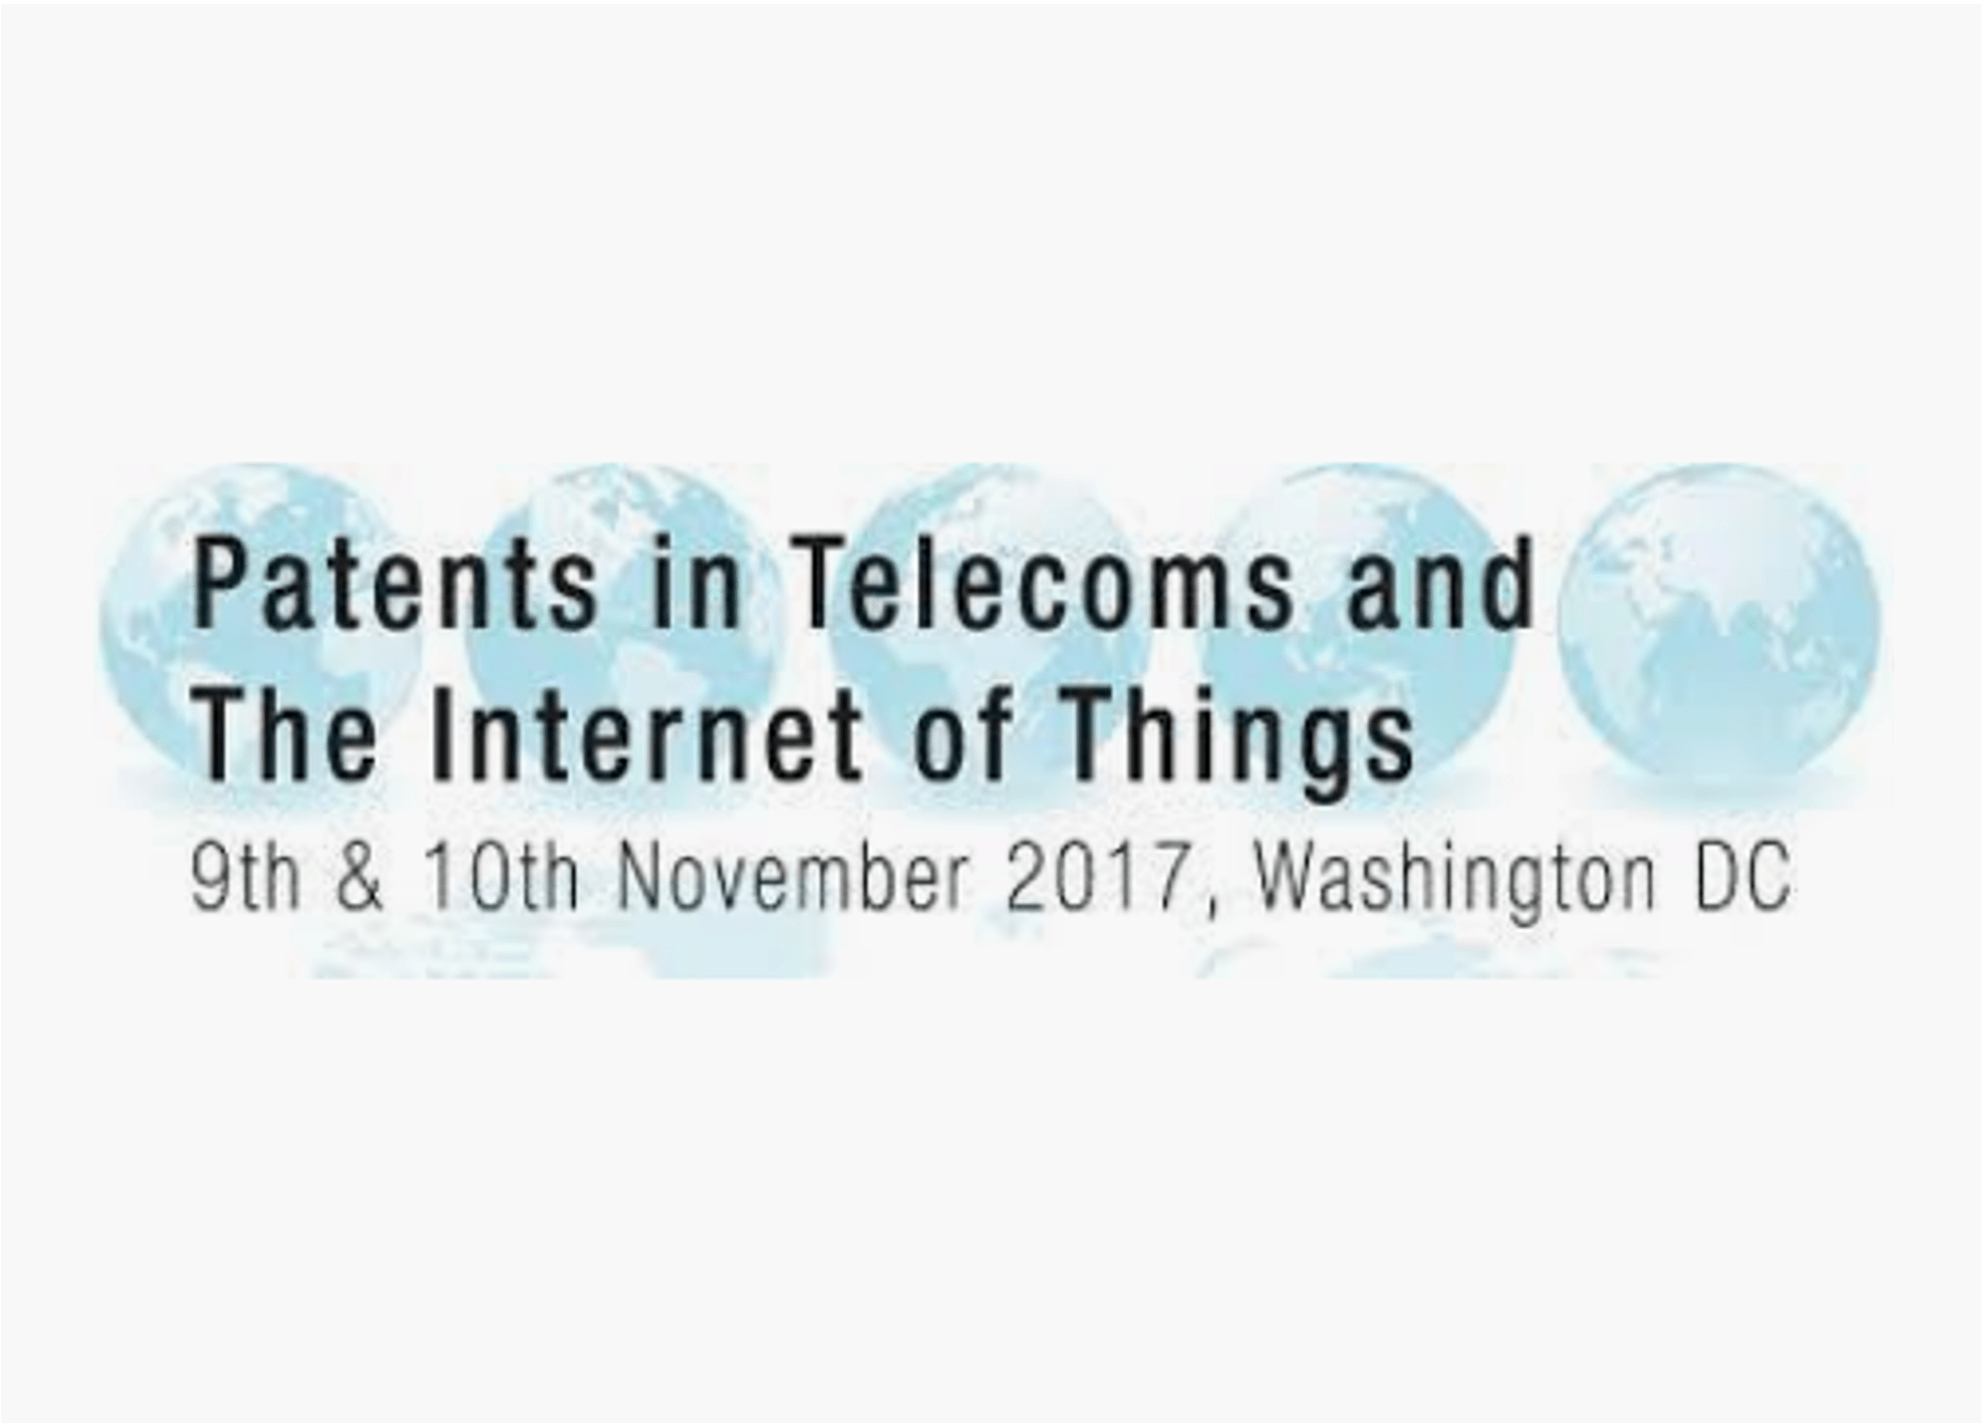 Patents in Telecom in Cooperation with ETSI and GSMA 2017